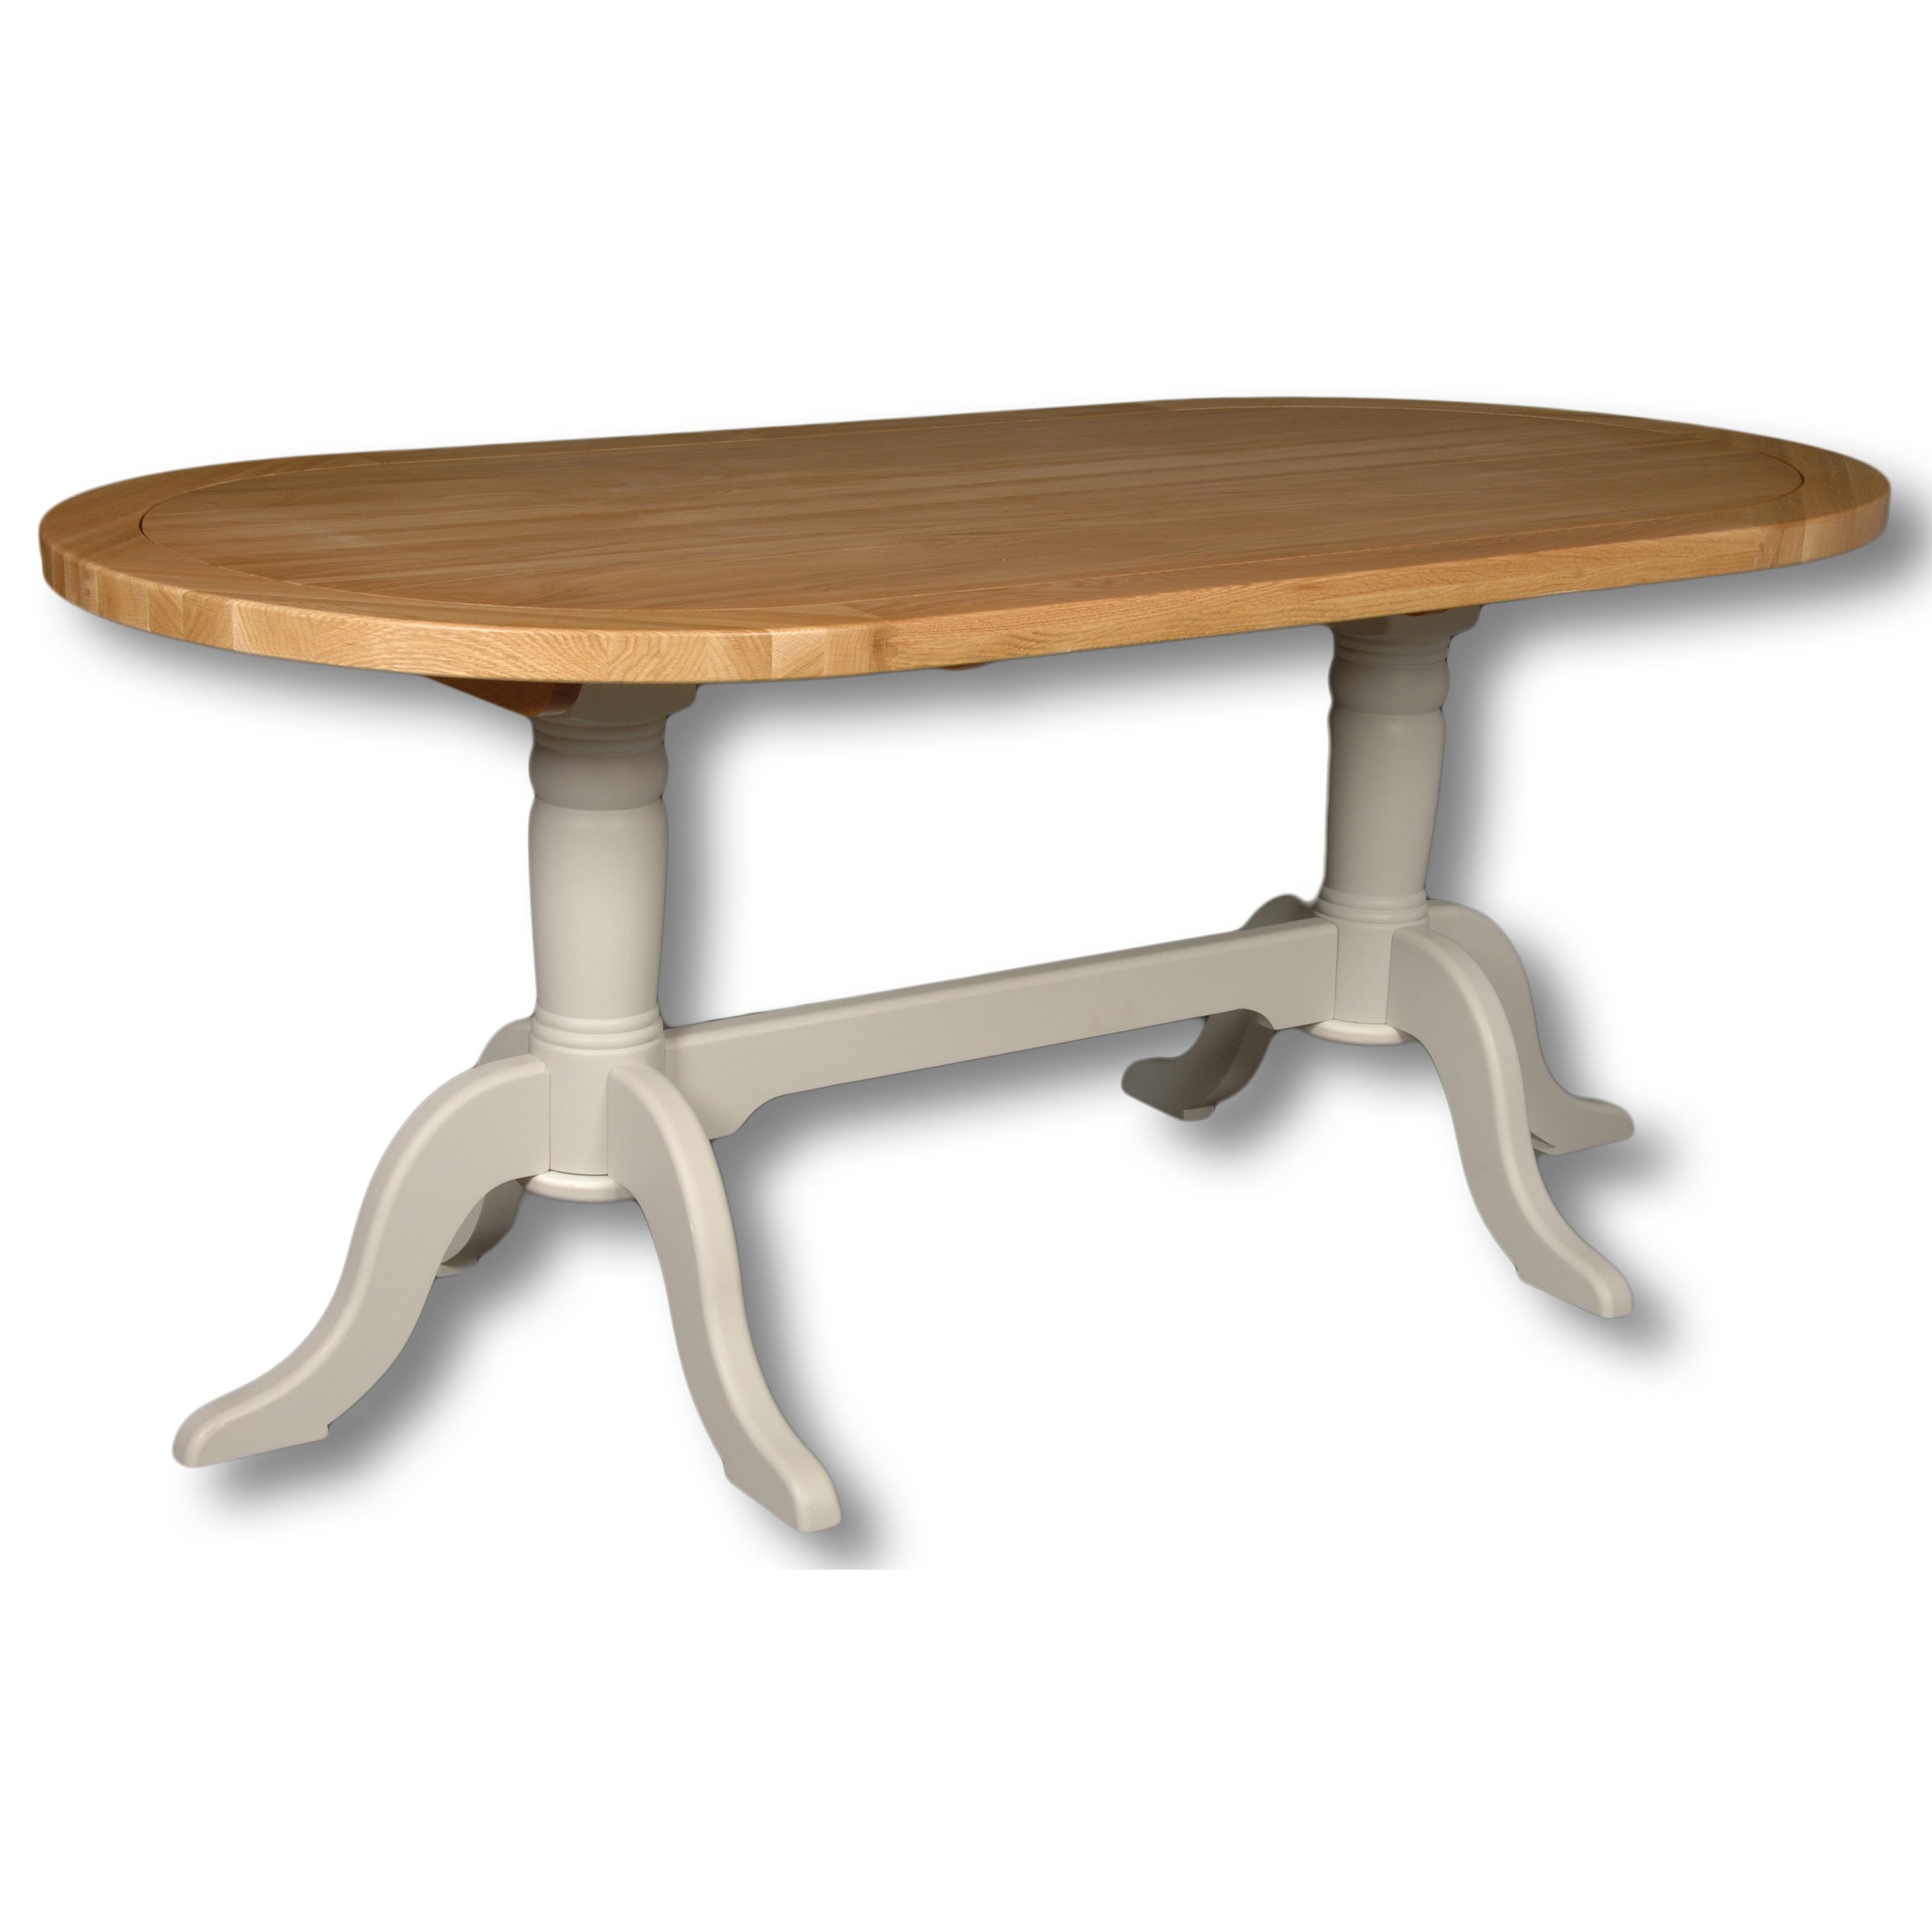 Rio Grey Large Oval Dining Table 1.8m